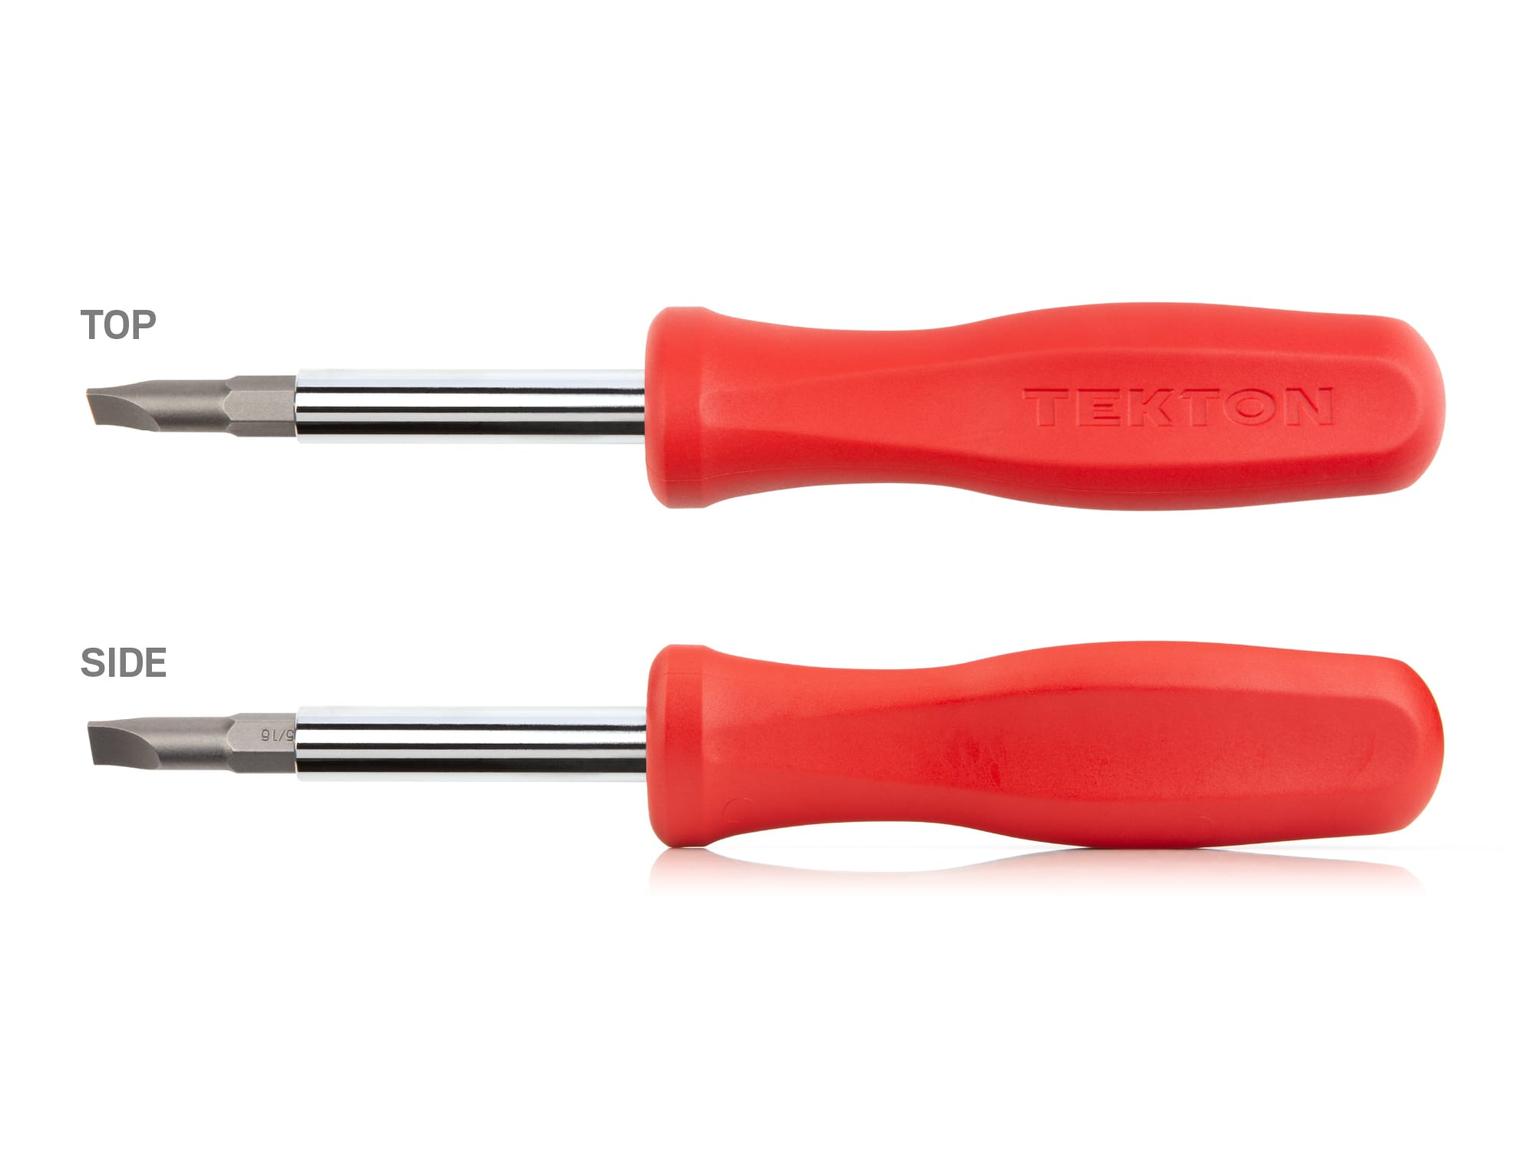 TEKTON DMS18017-T 6-in-1 Slotted Driver (3/16 in. x 1/4 in., 1/8 in. x 5/16 in., Red)